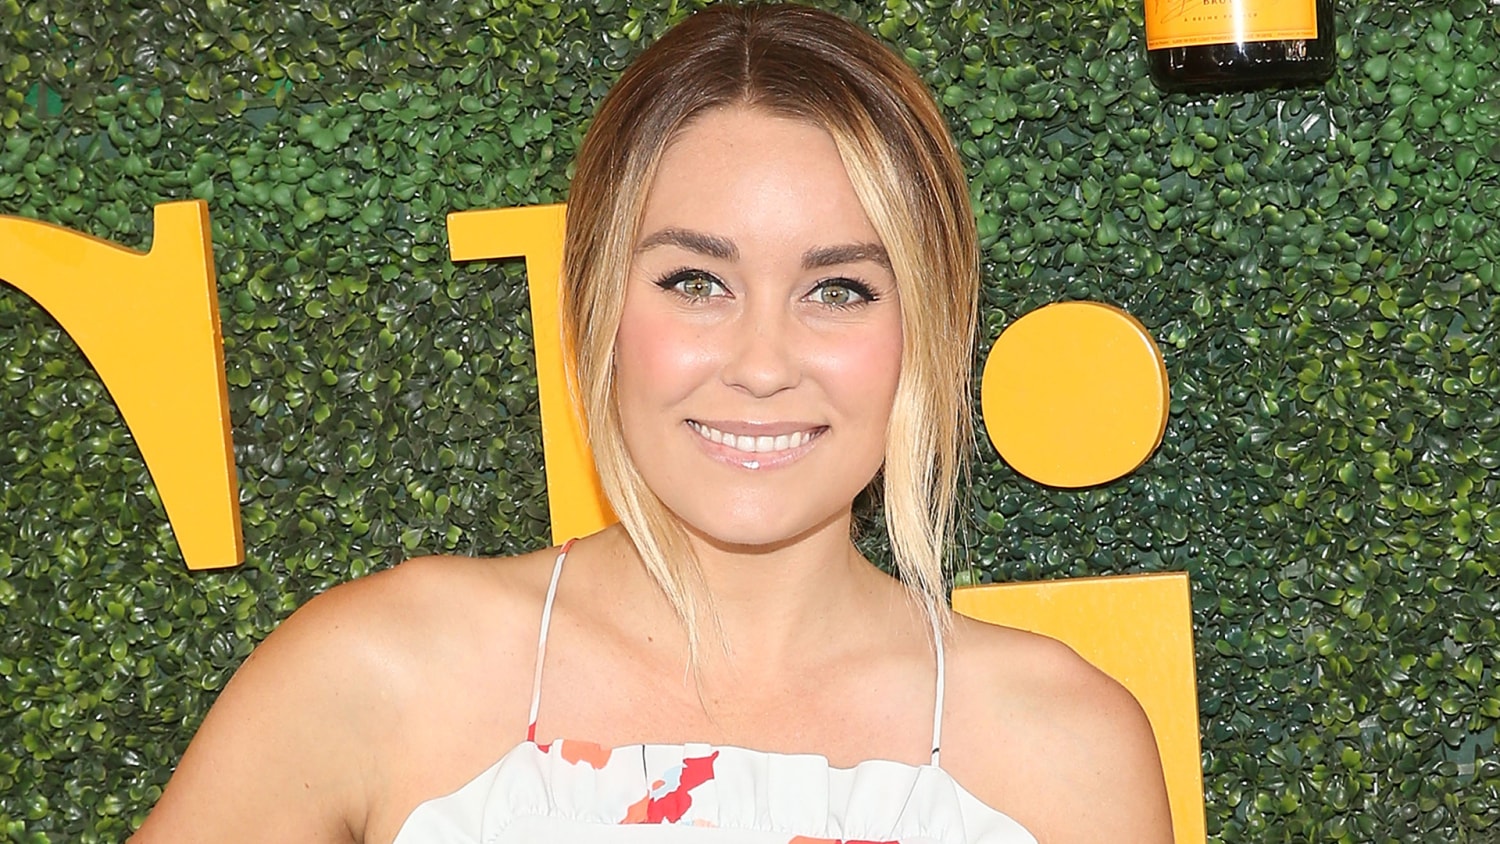 Oh Baby: Top Tips for the 4th Trimester, Part 2 - Lauren Conrad